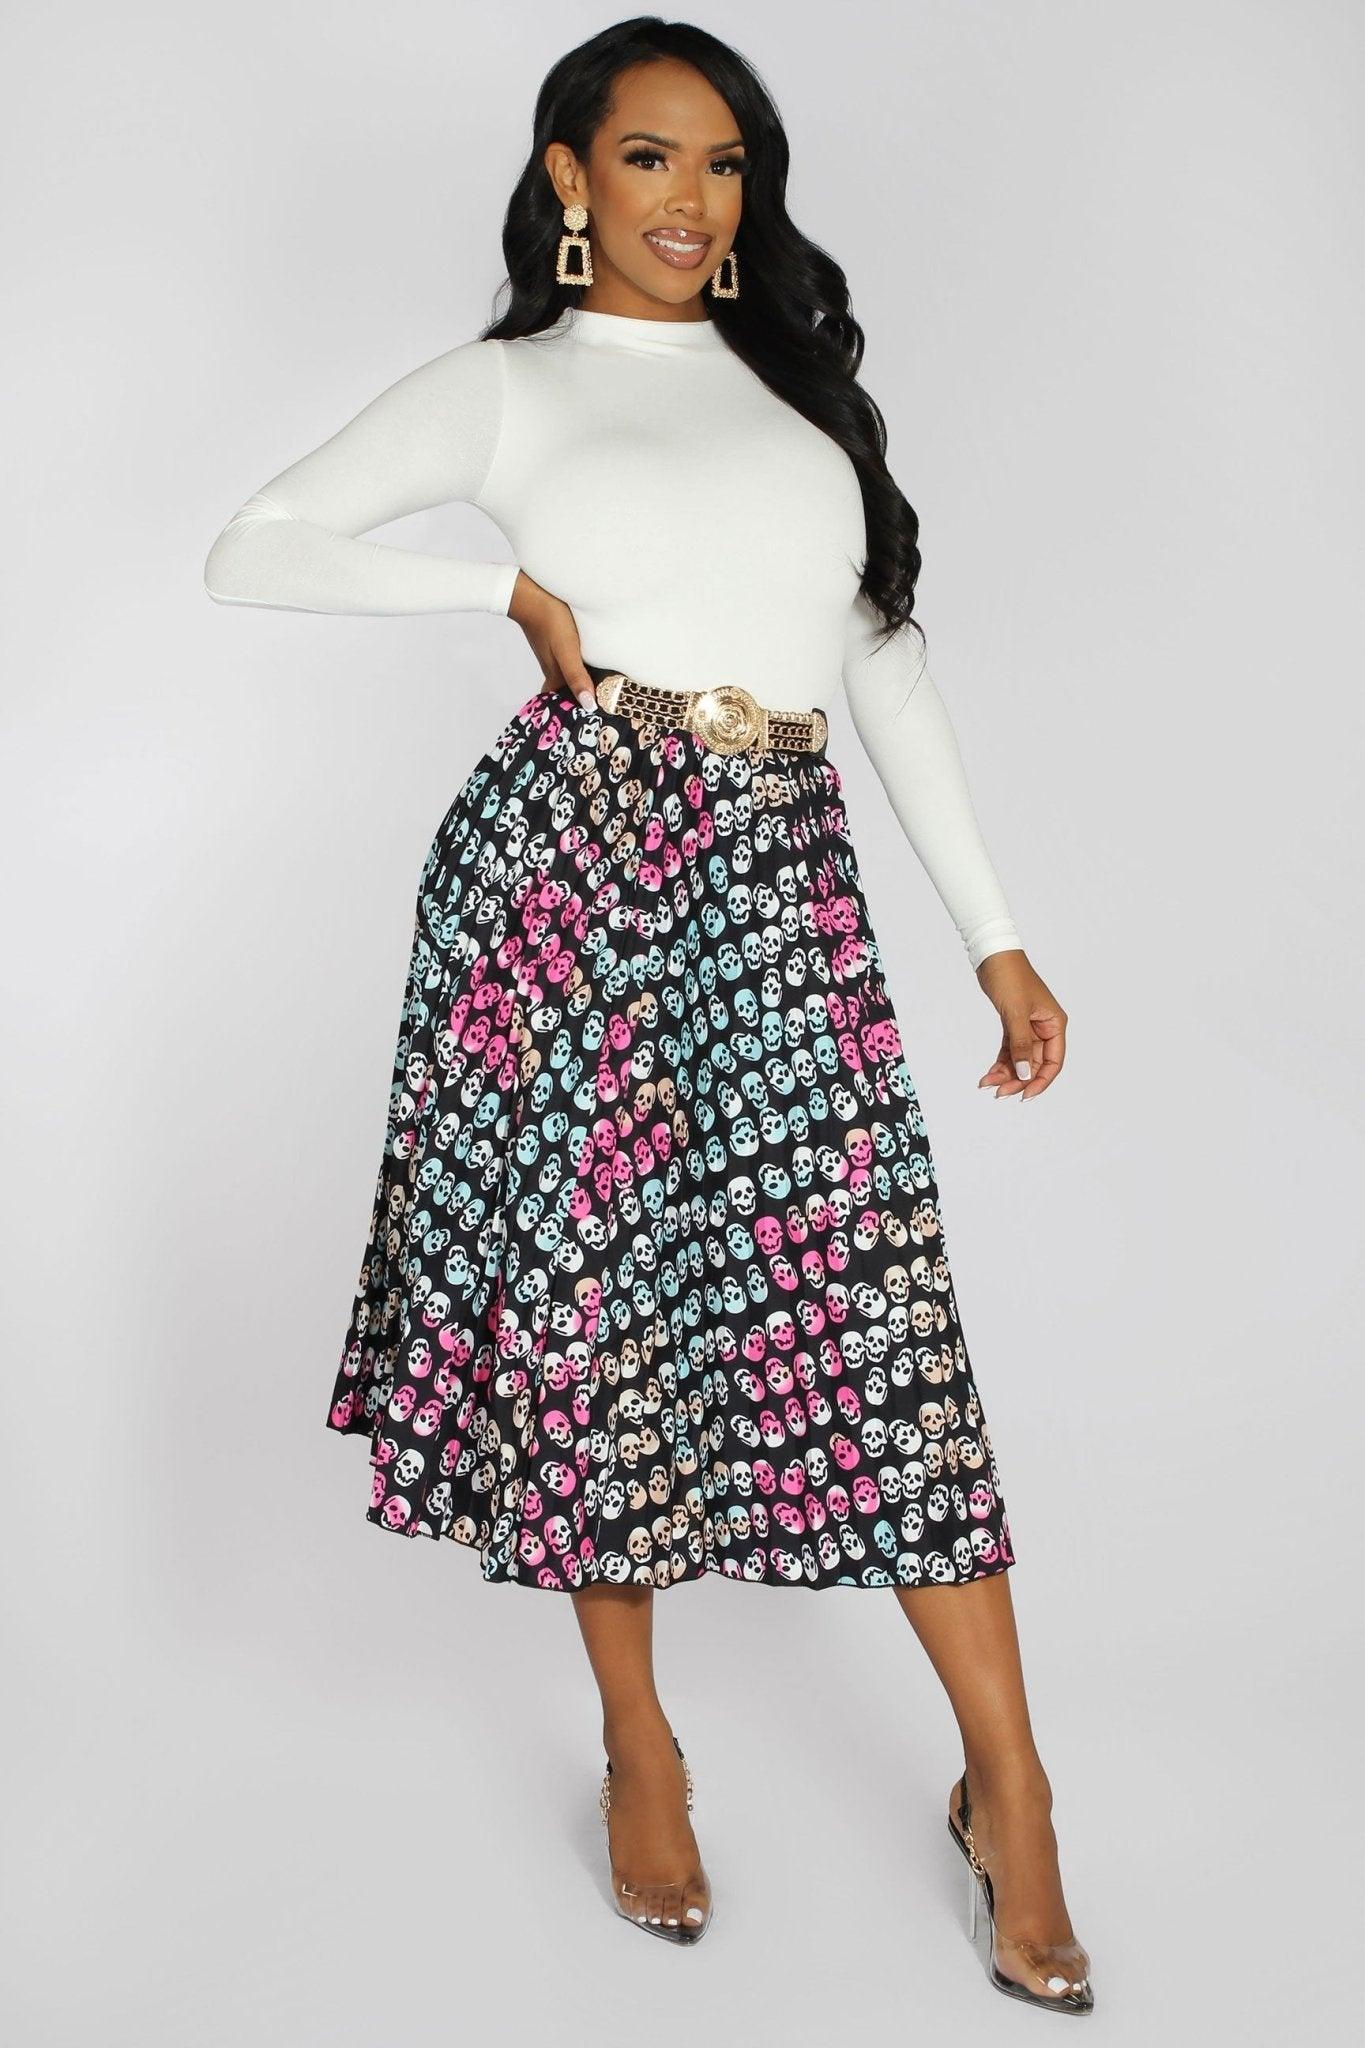 Kehlani ONE SIZE FITS ALL Pleated Skirt - MY SEXY STYLES